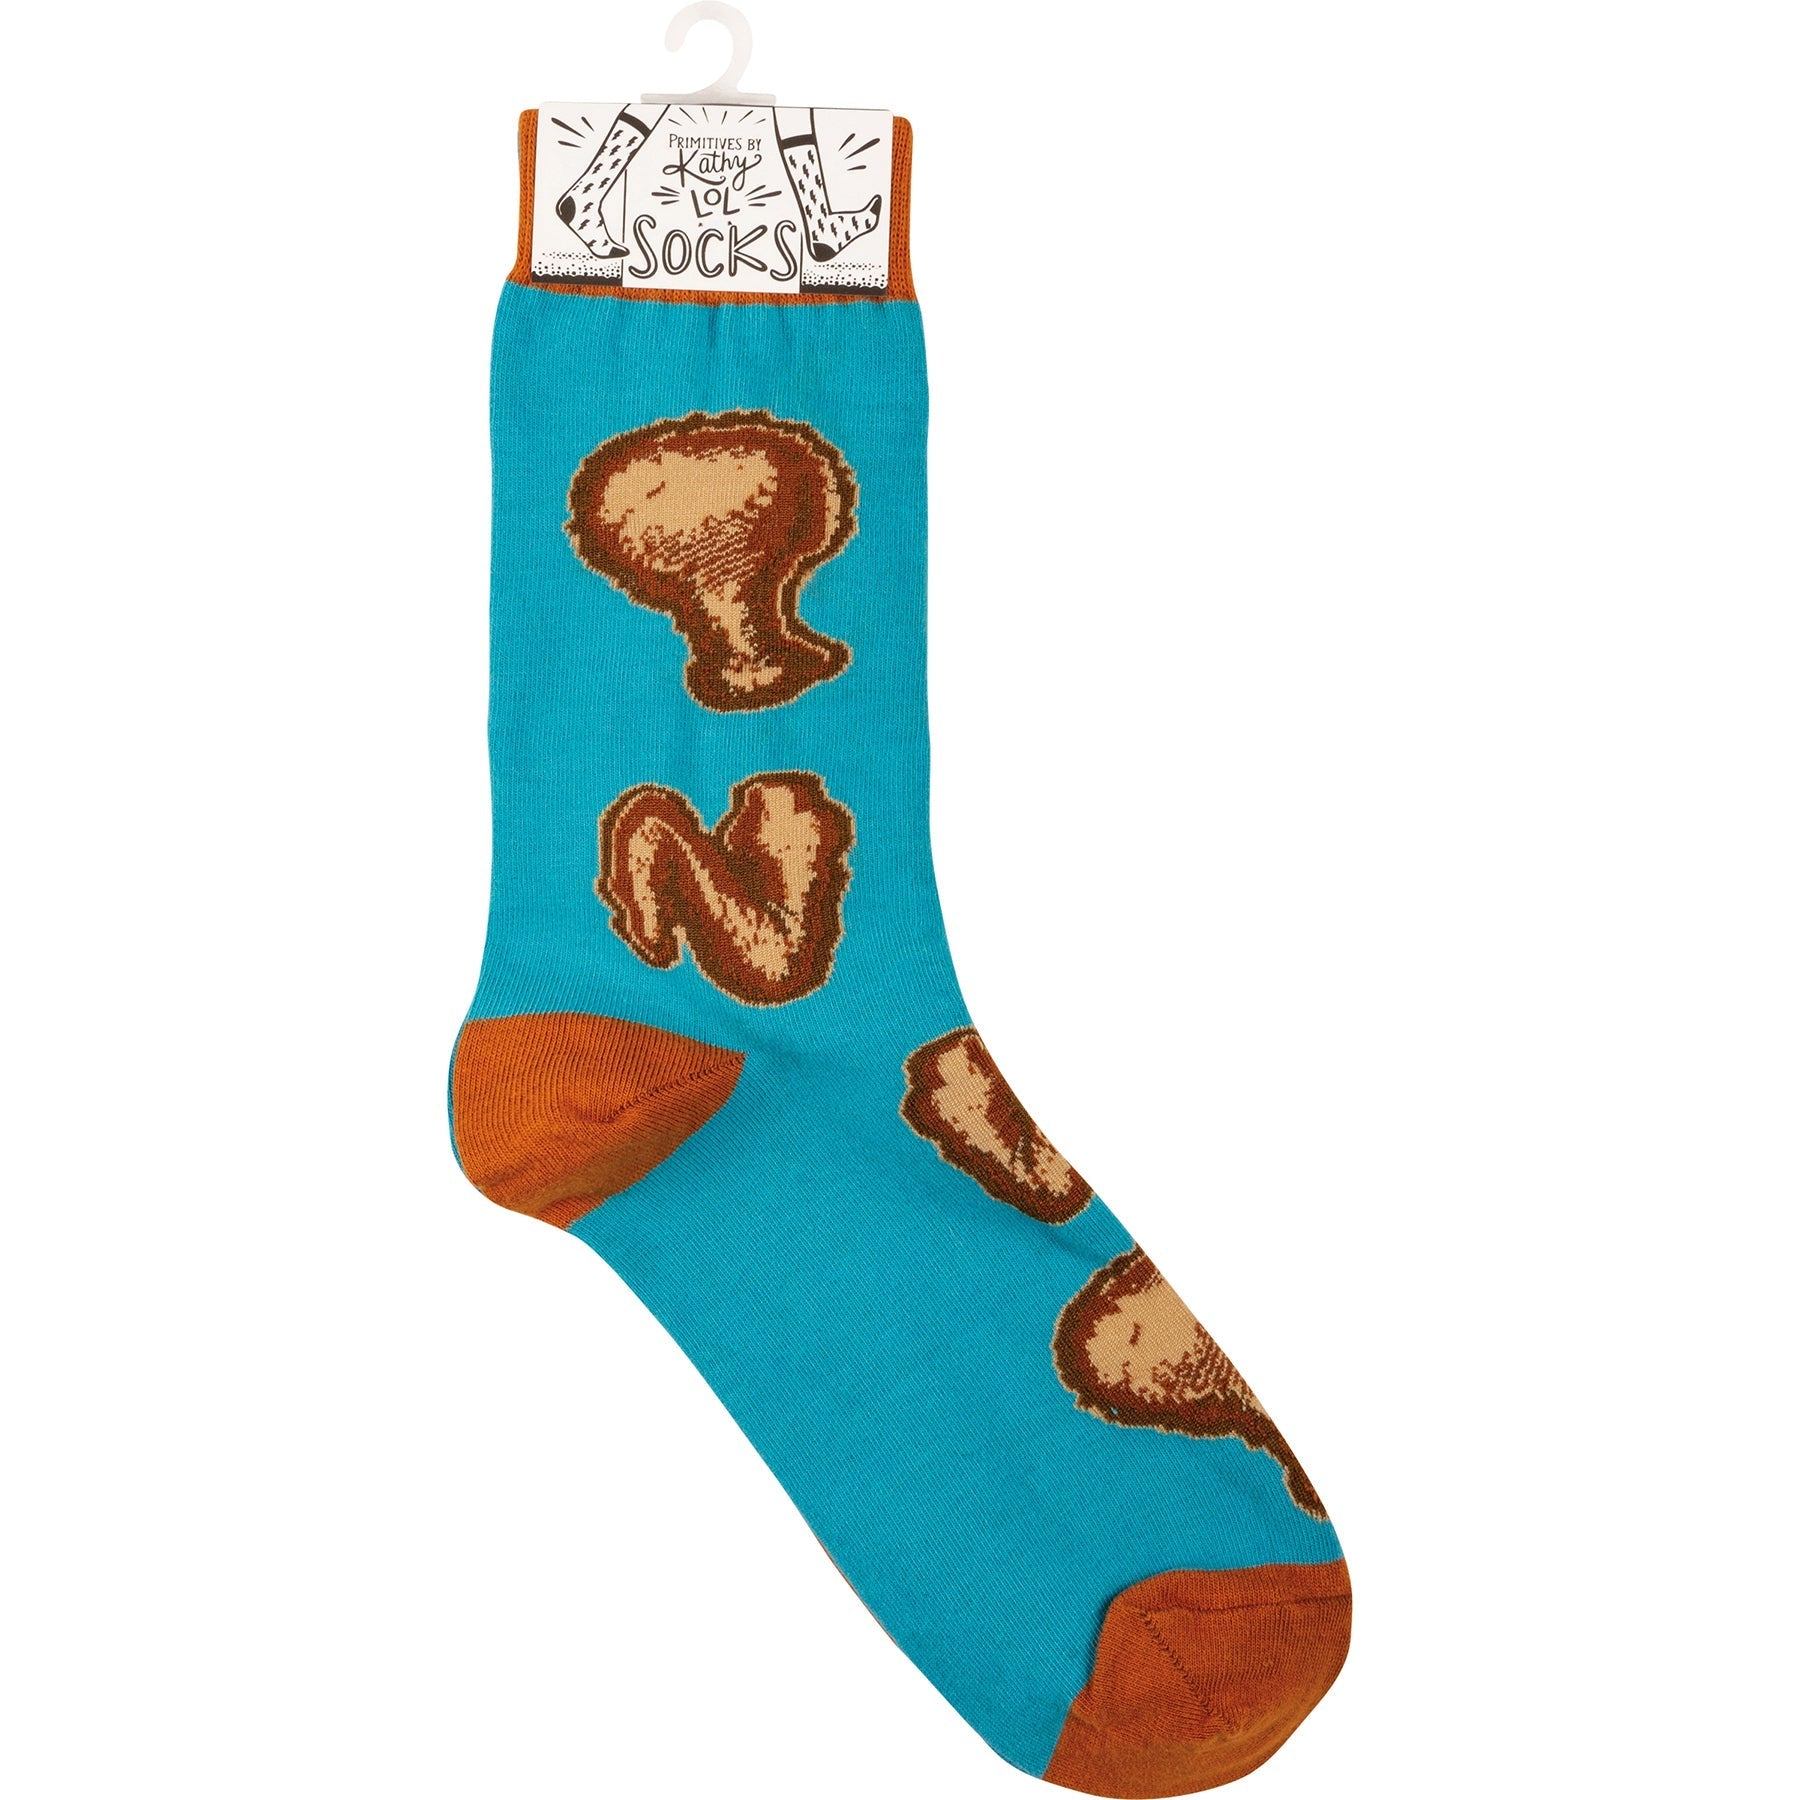 Chicken And Waffles Socks 🐔🧇 | Mismatched Unisex Cotton Socks